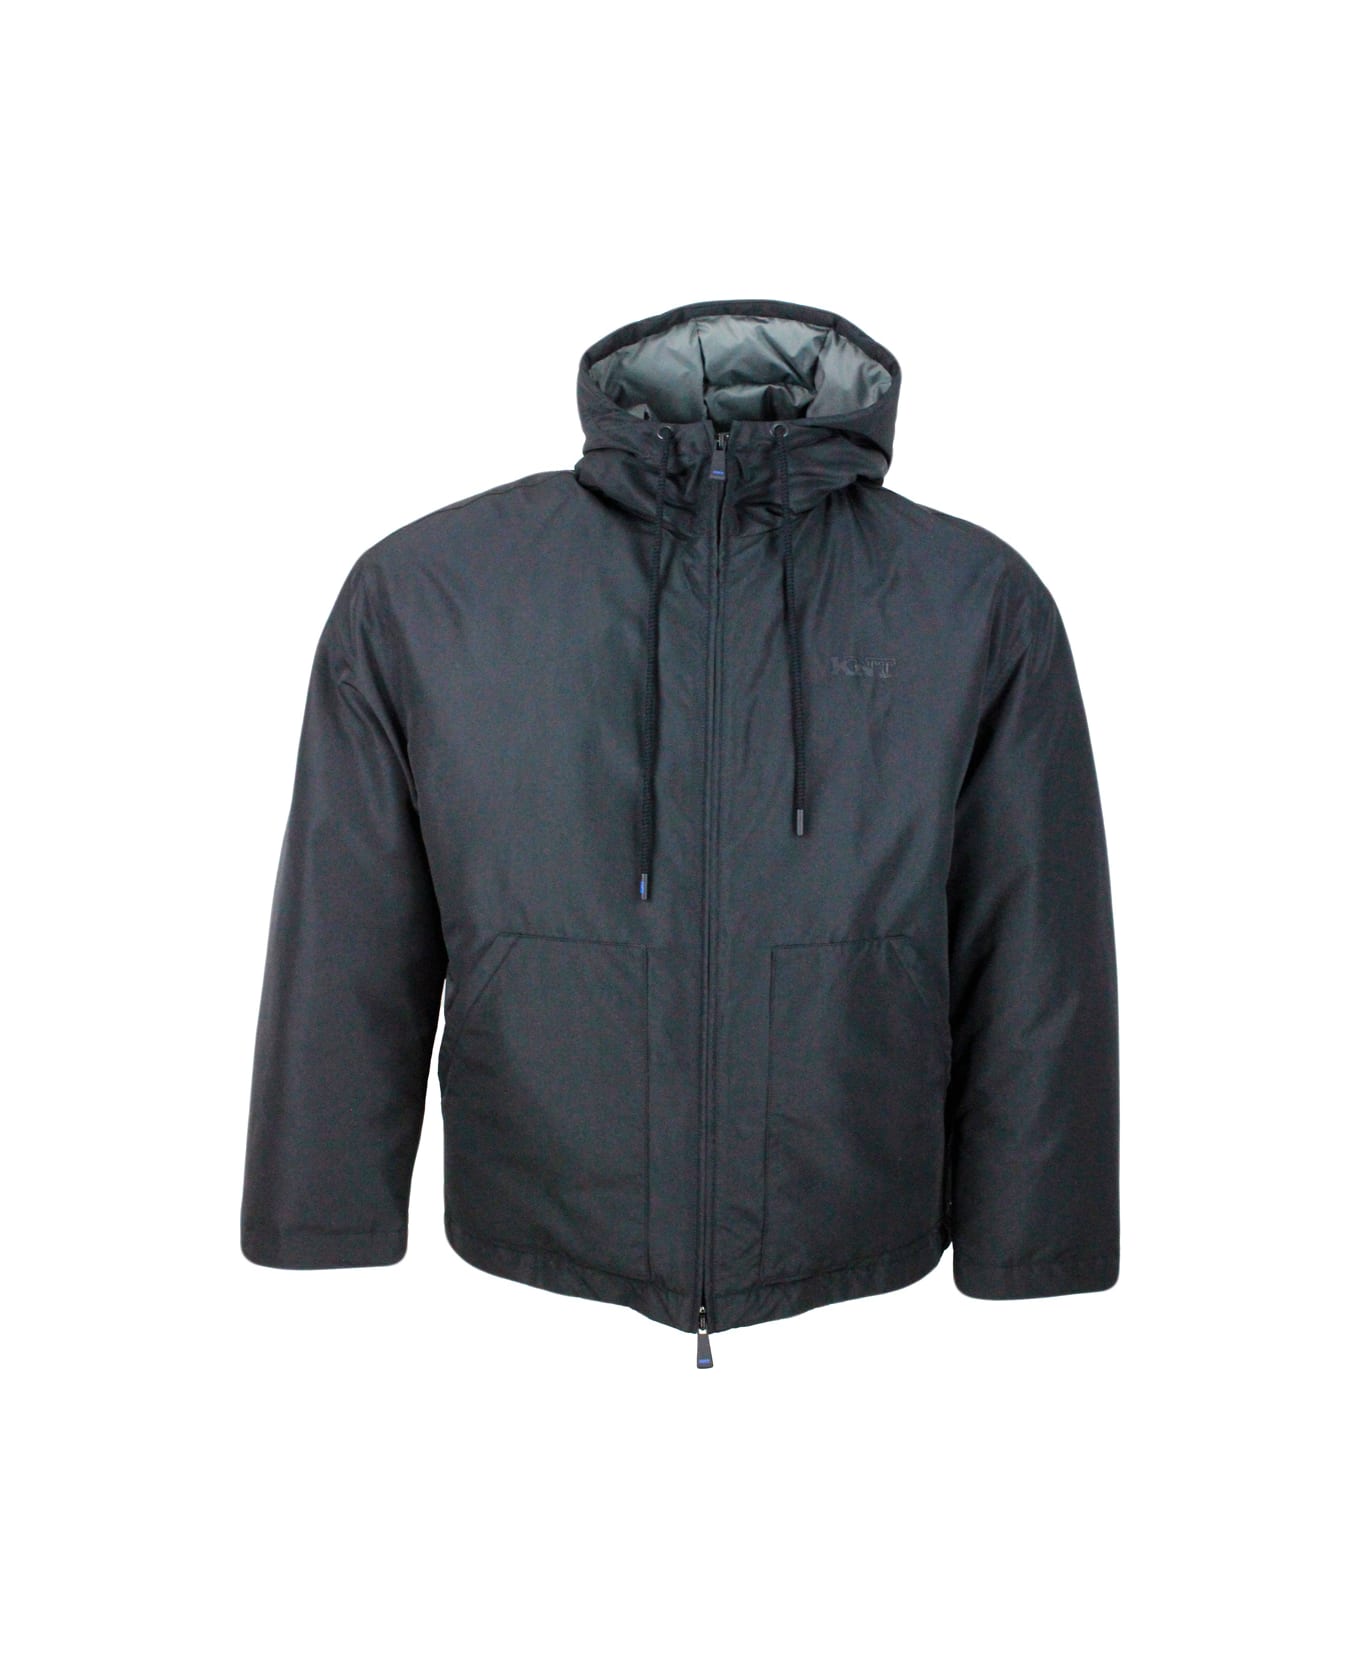 Kiton Knt Down Jacket In Technical Fabric With Hood With Drawstring With Smooth Exterior And Boudin Quilted Interior In Contrasting Color. Small Matching Lo - Black